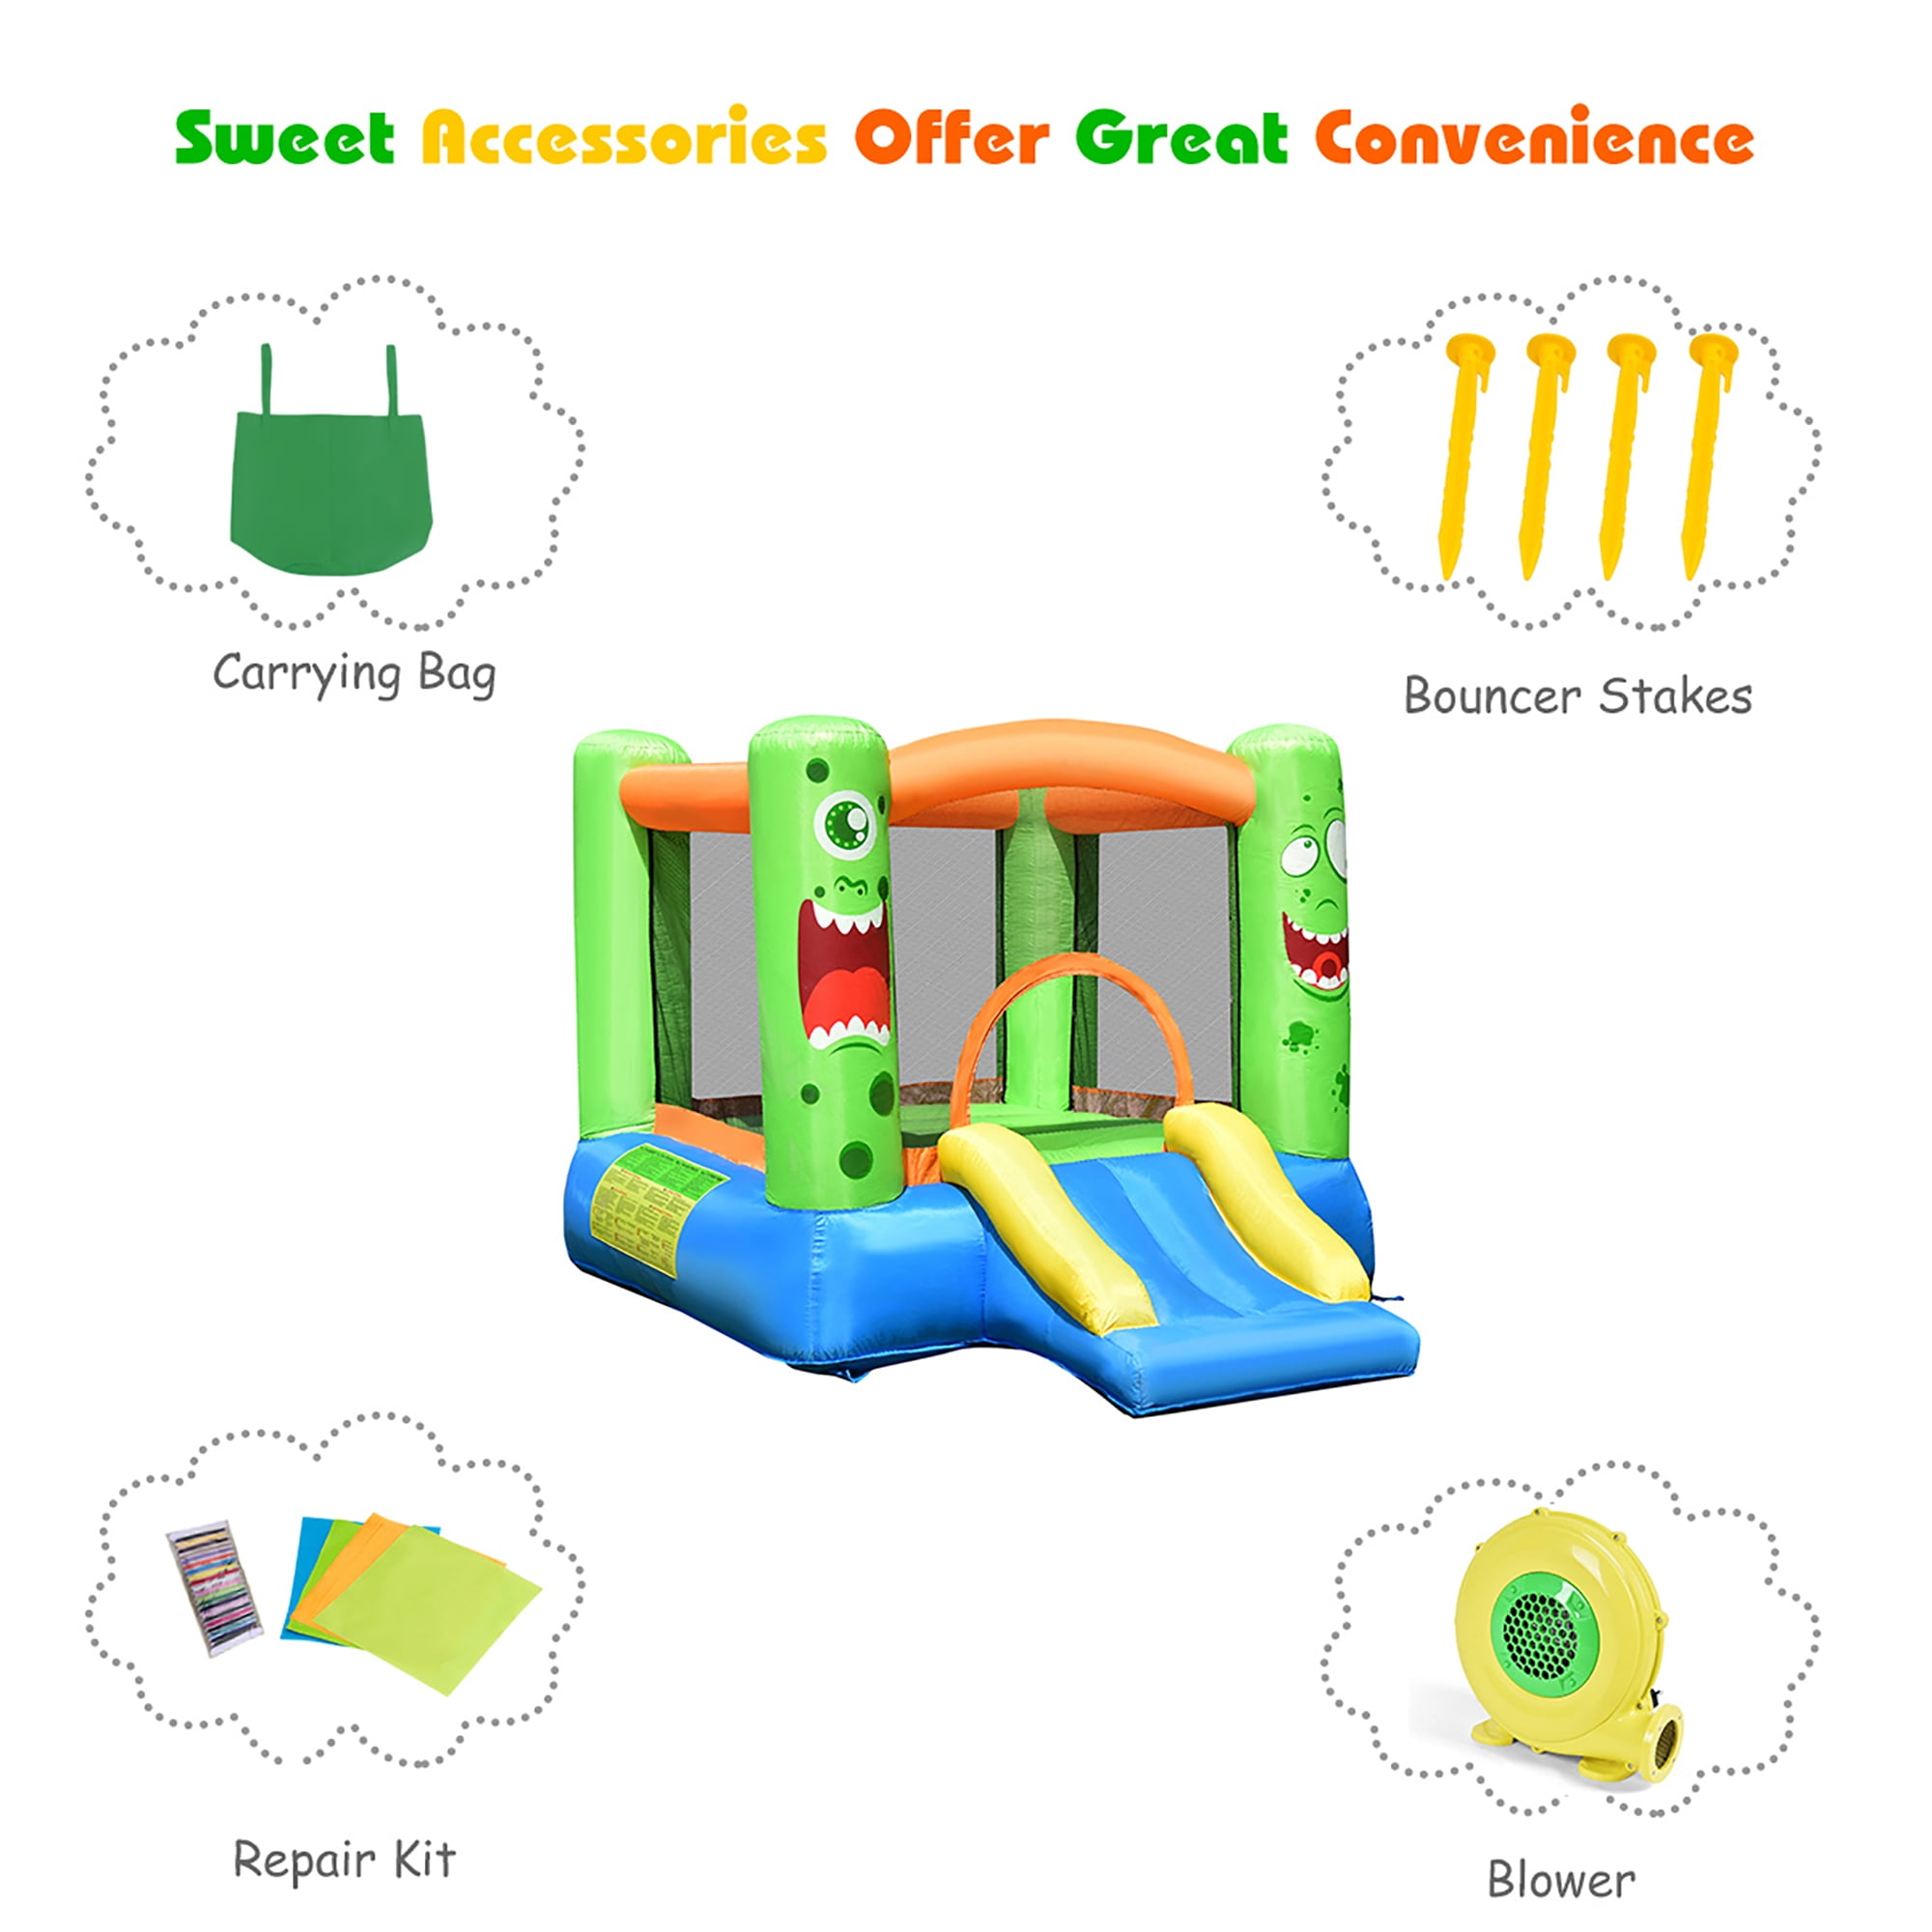 Costway Inflatable Bounce House Kids Bouncy Jumping Castle with Dual Slides  and 480-Watt Blower NP10370US - The Home Depot